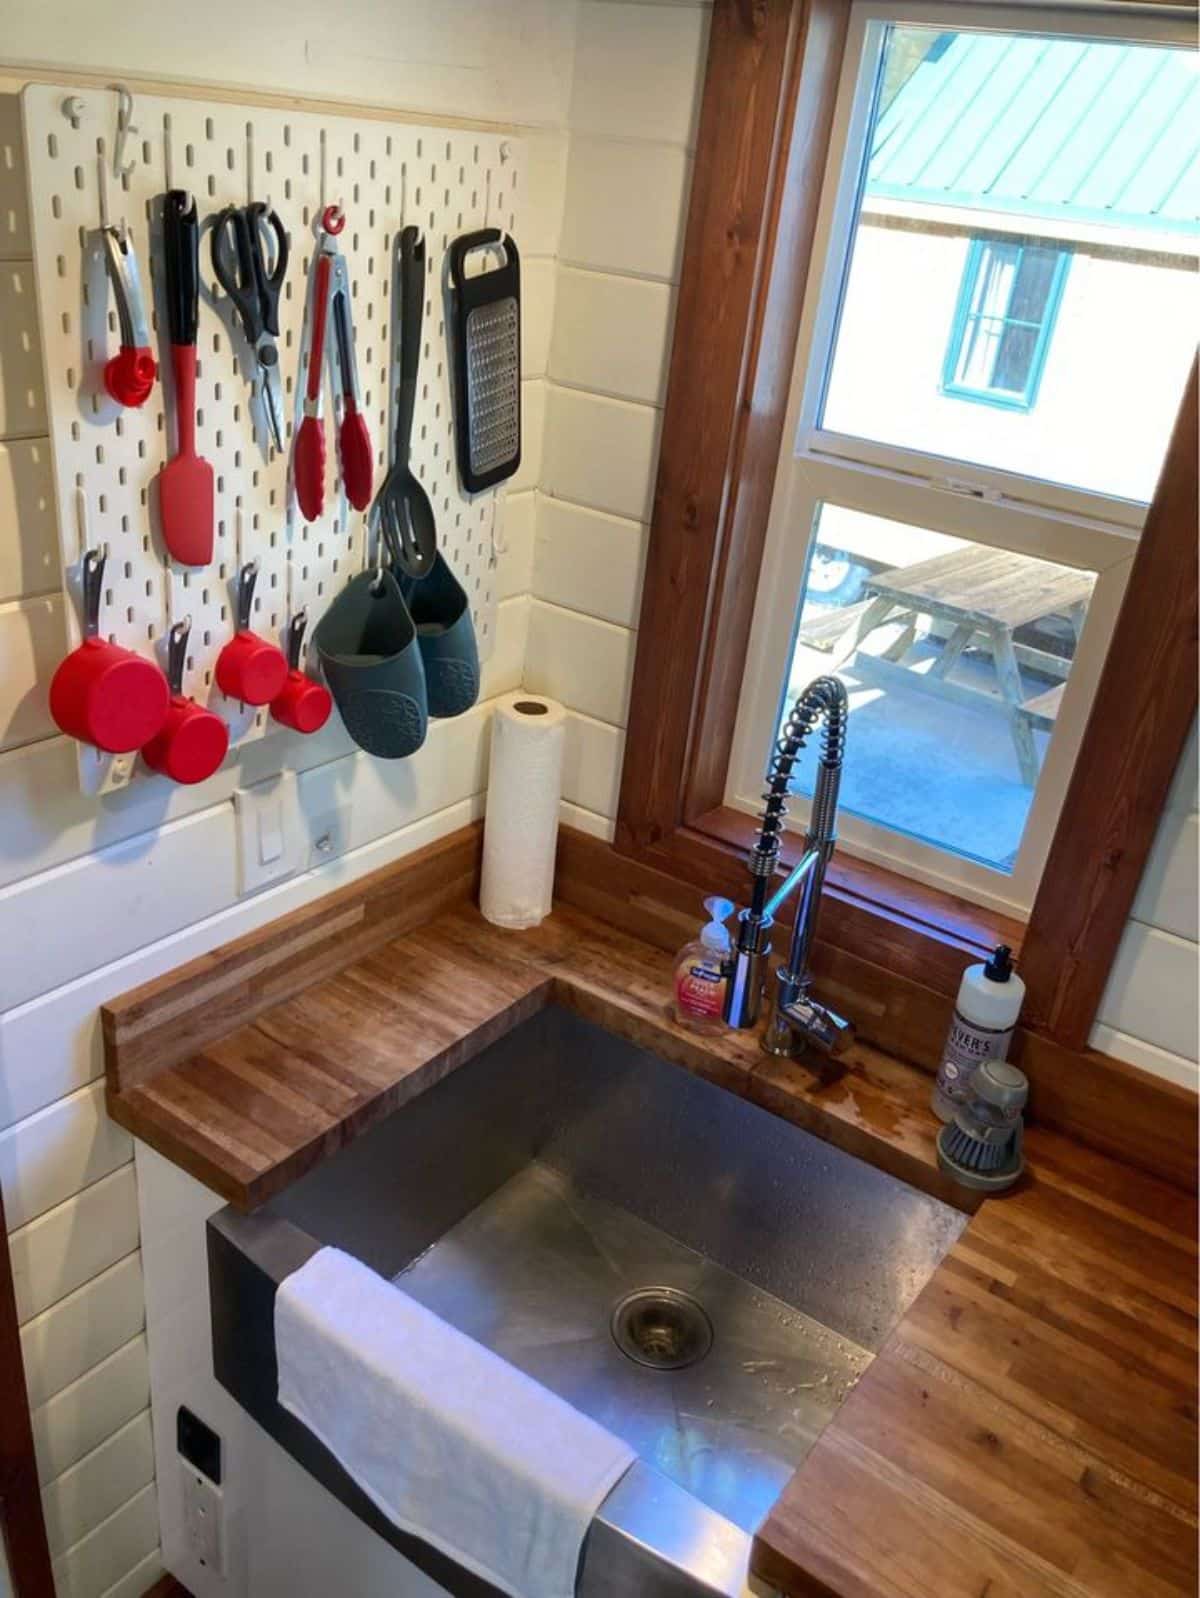 stainless steel sink besides the window in kitchen area